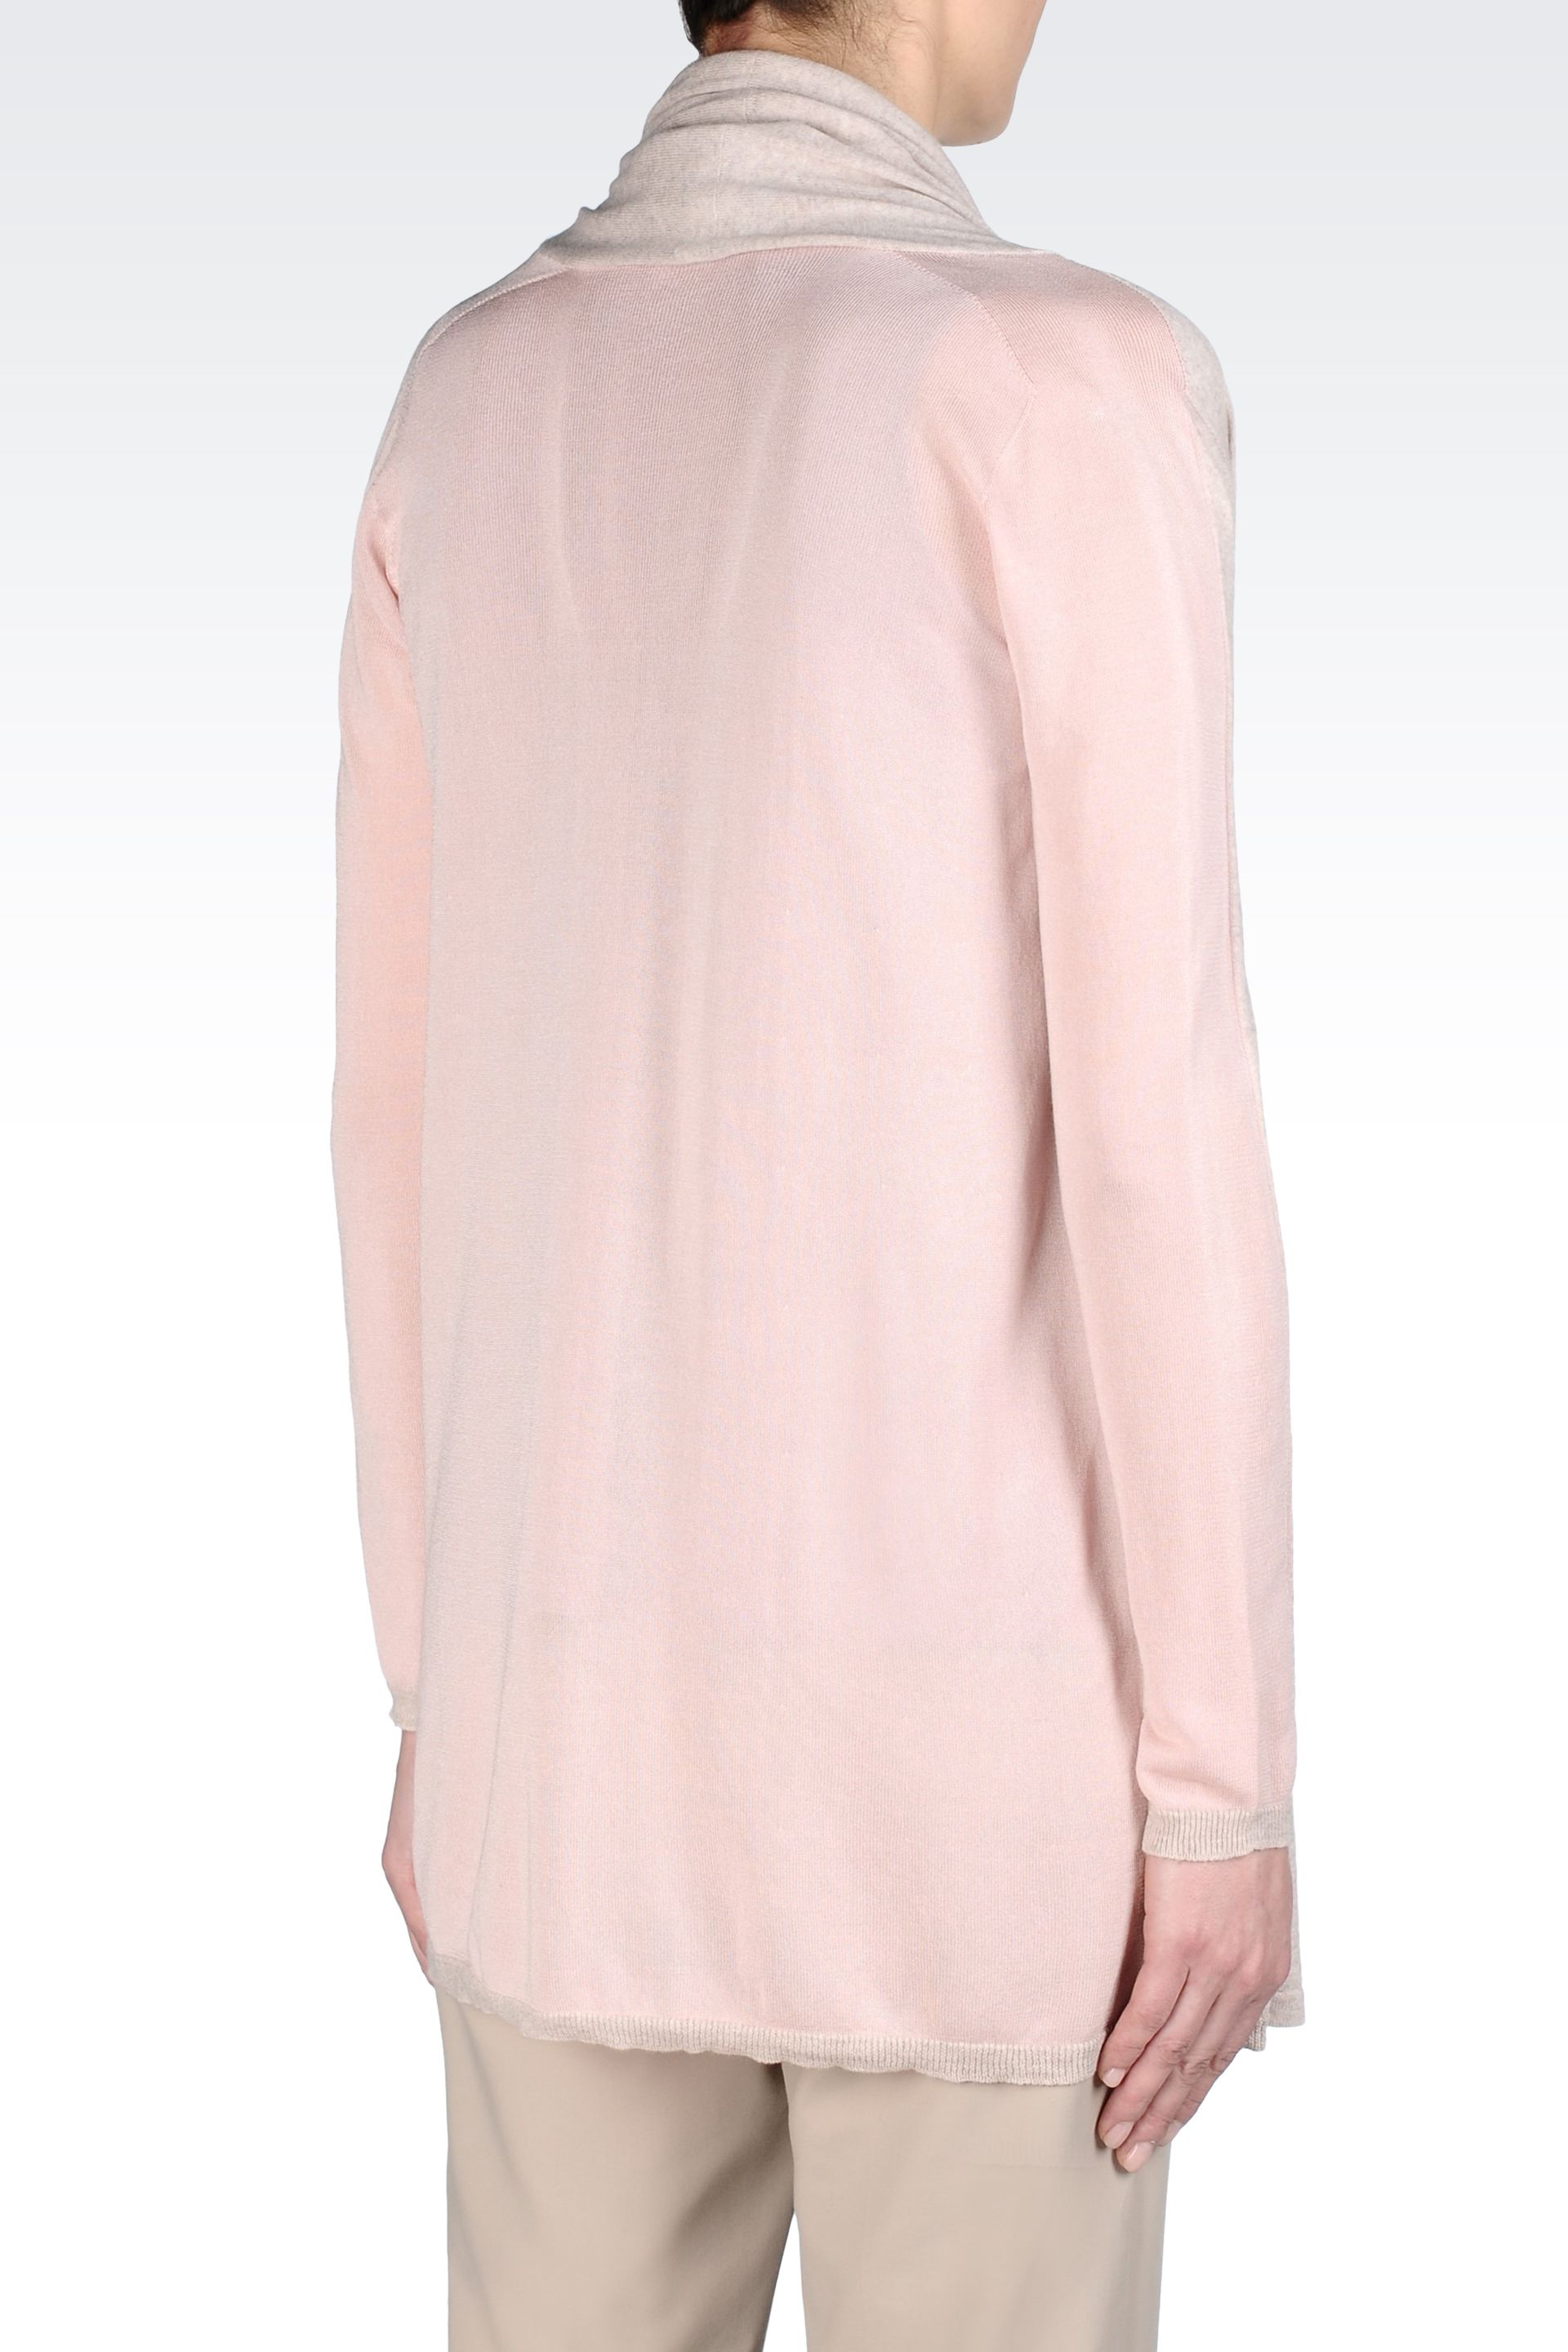 Armani Two-Colour Long Cardigan In Cotton And Cashmere in Natural ...